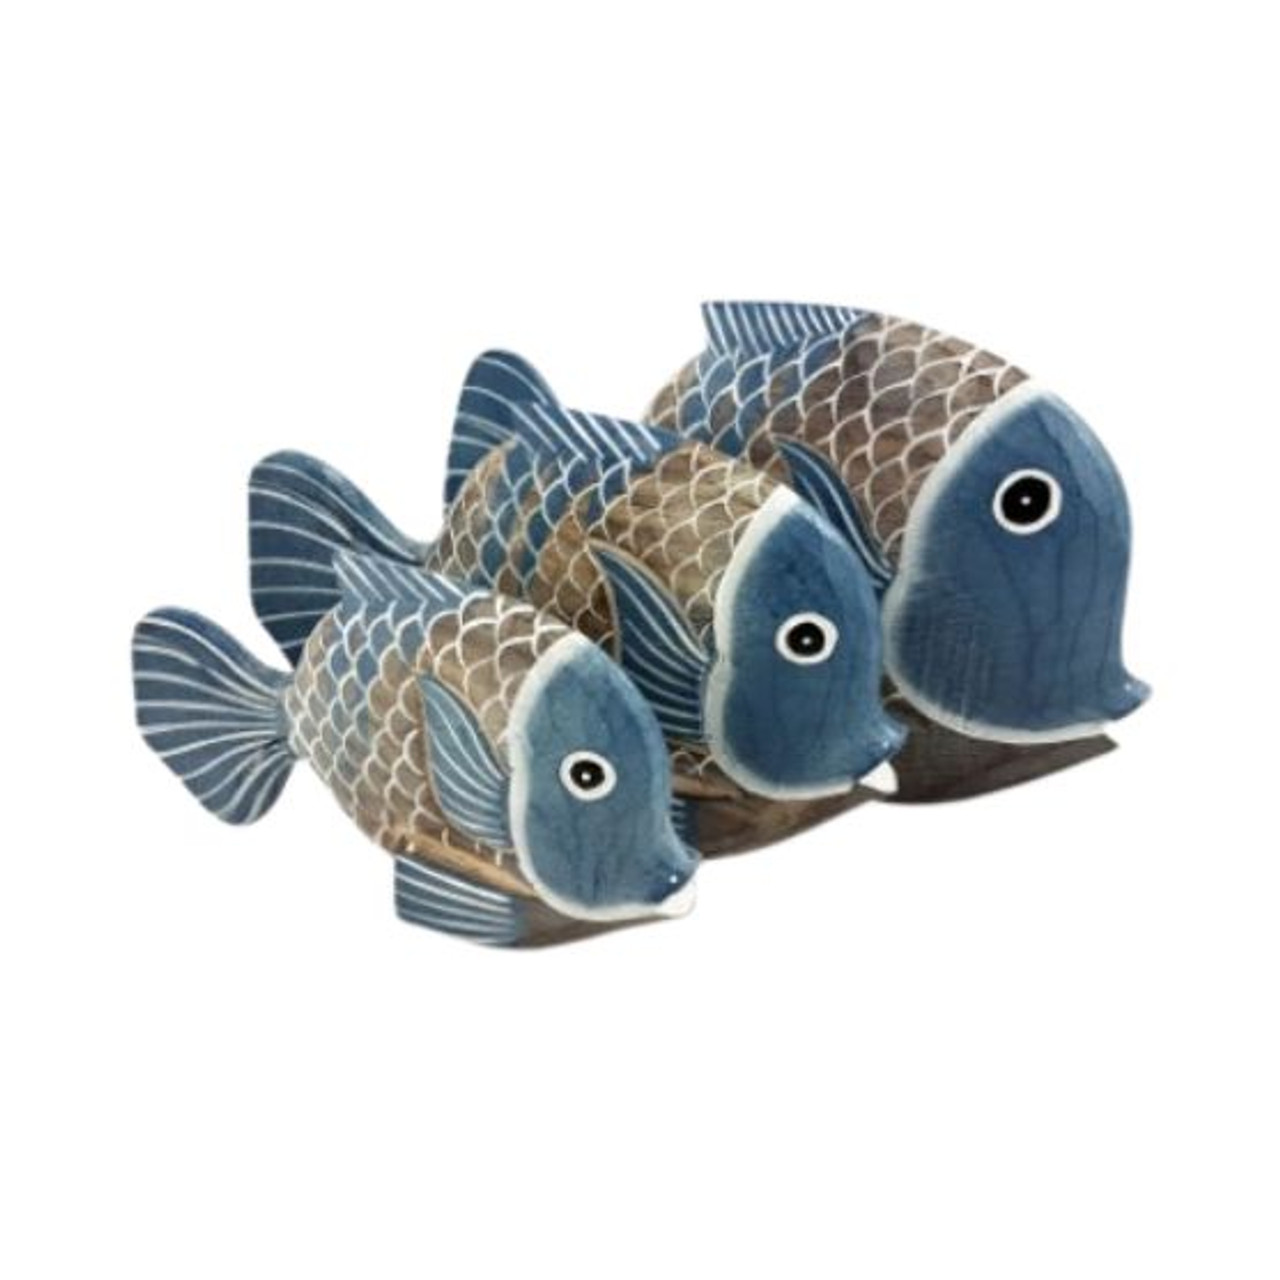 Large Wood Fish Set of 3 - Blue - The Loving Home